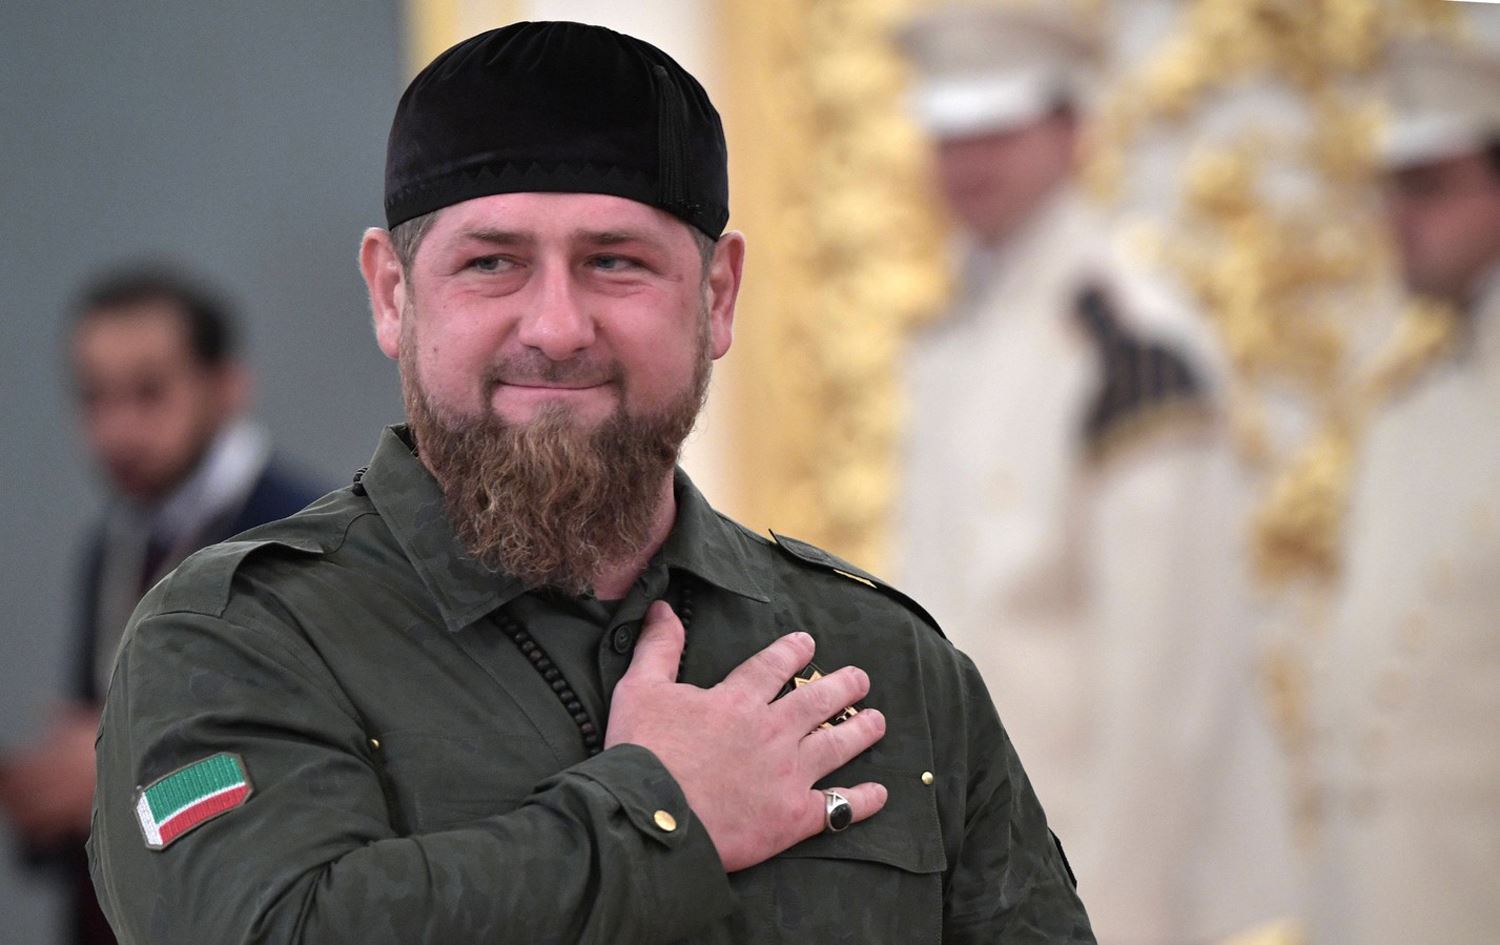 Kadyrov issues shoot-to-kill orders against protesters